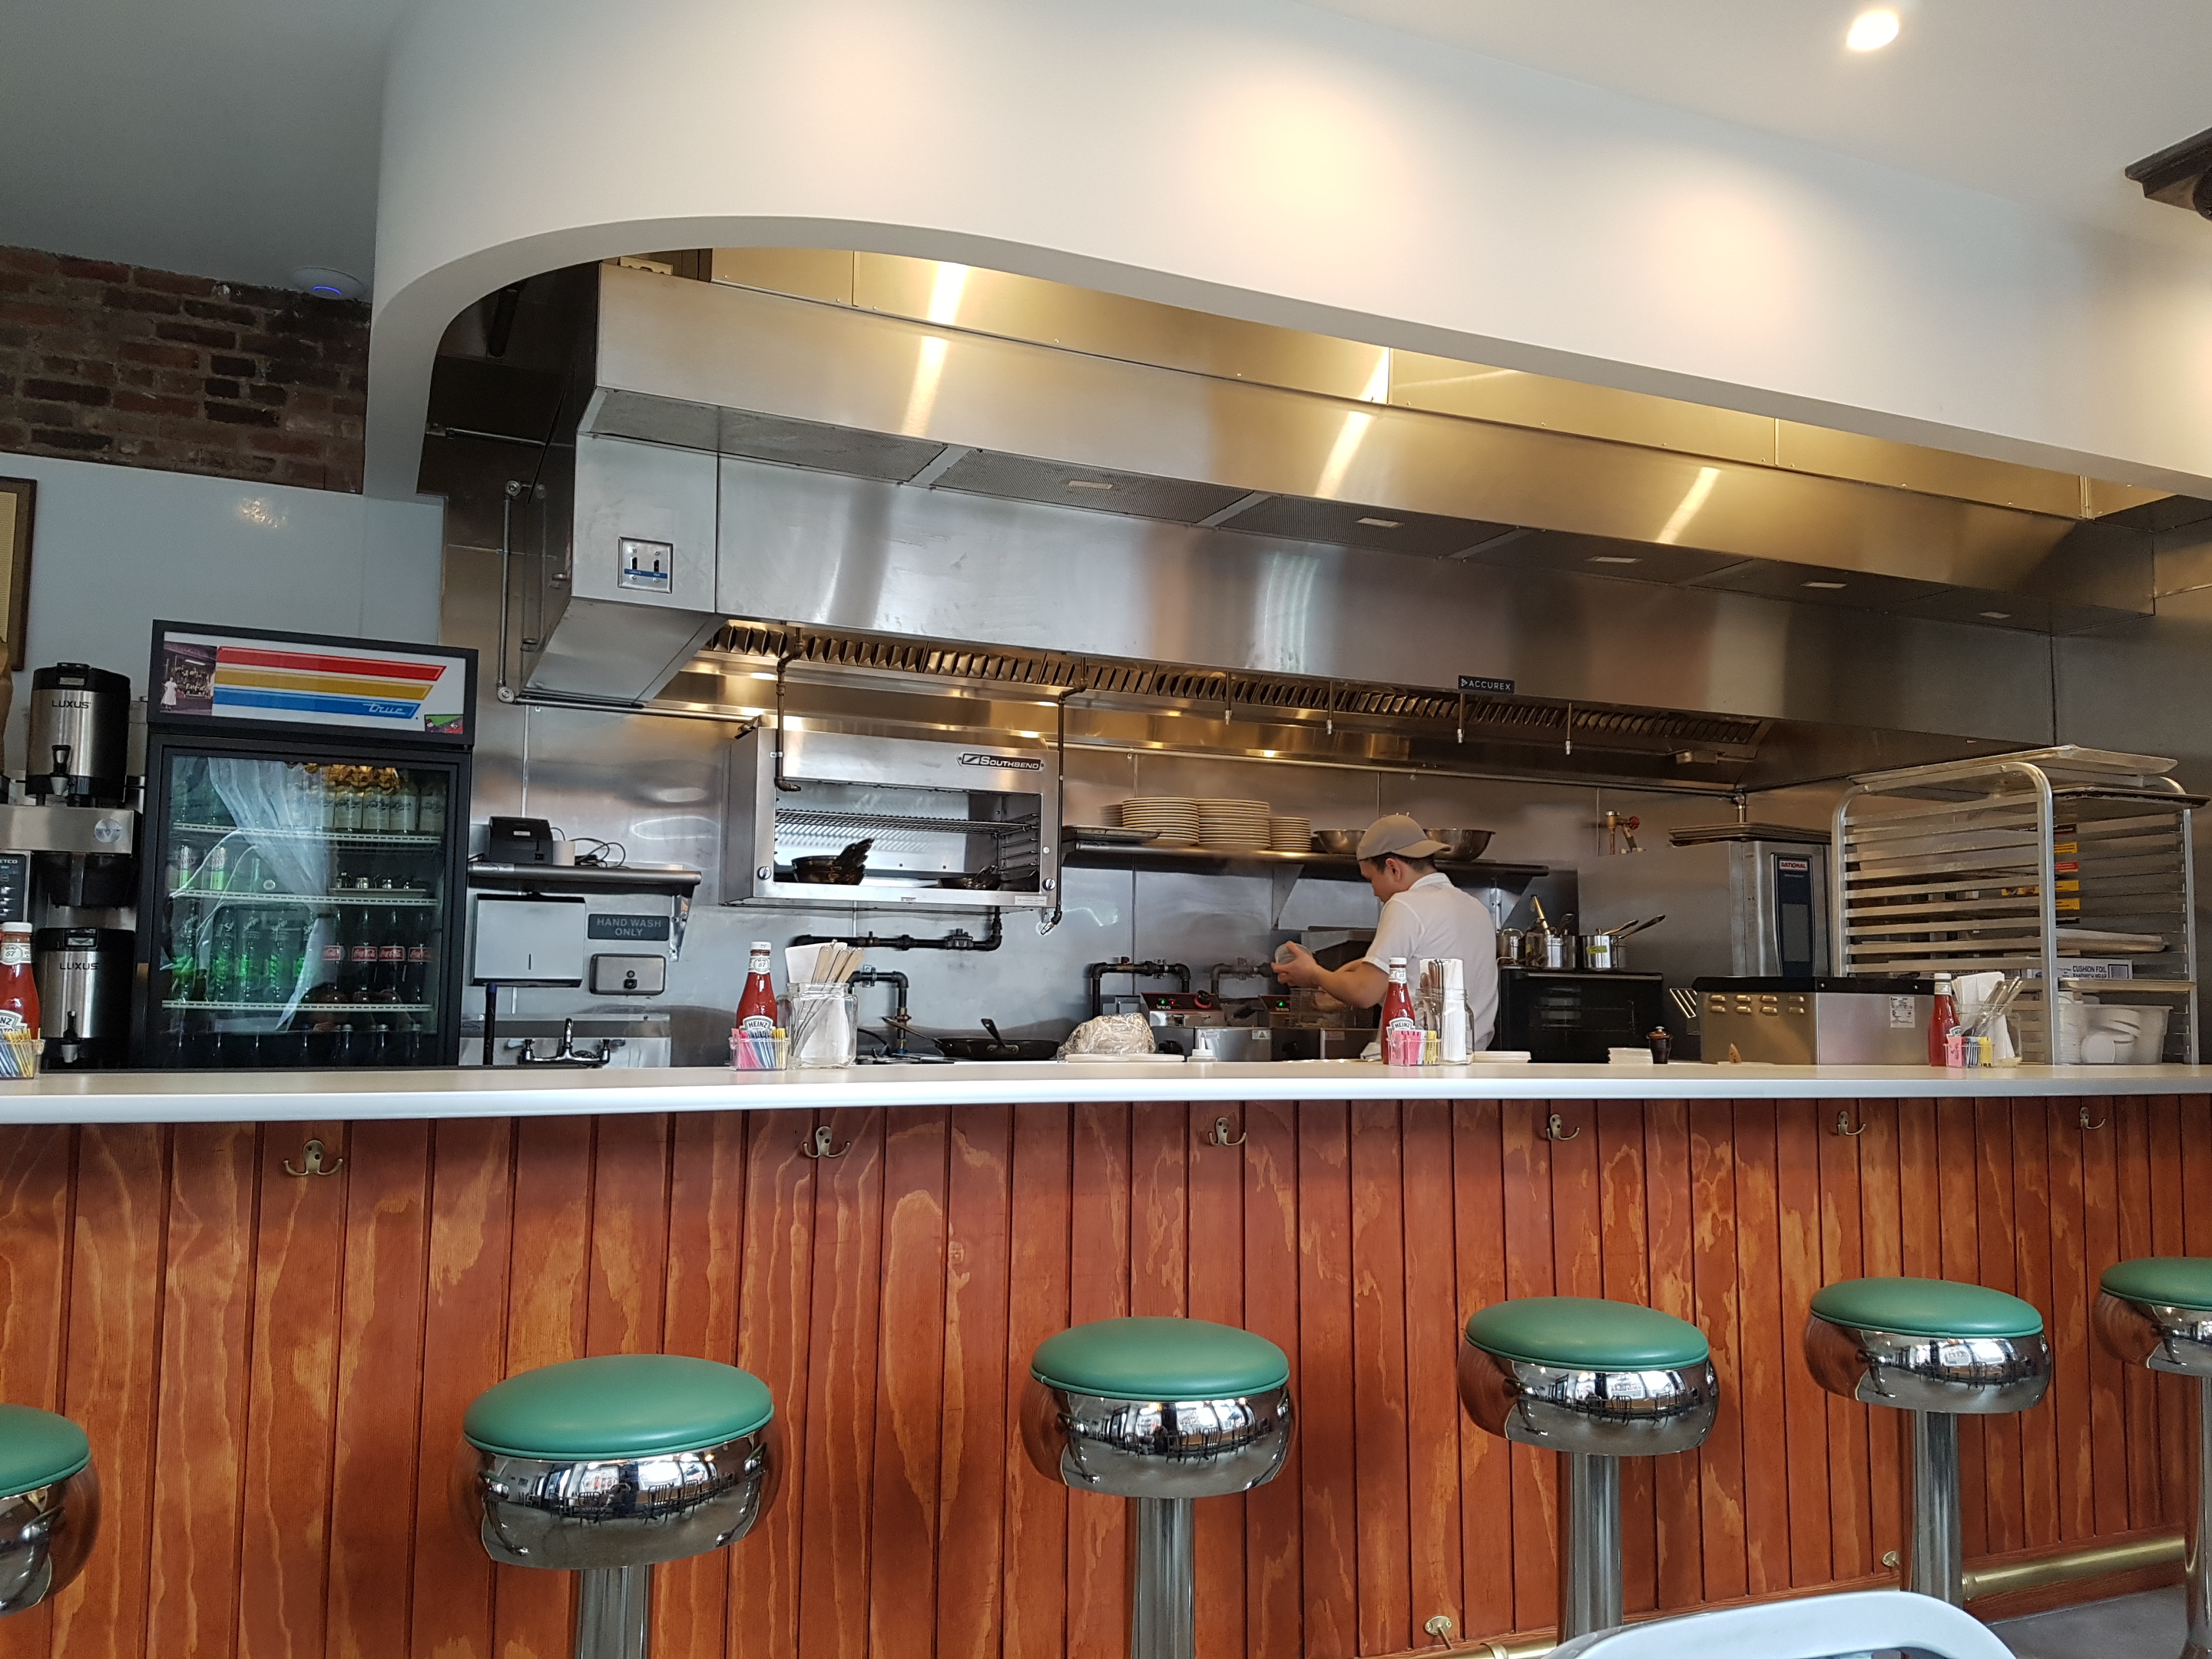 Green bar stools are located in front of a wooden diner counter, and the kitchen can be seen in the background